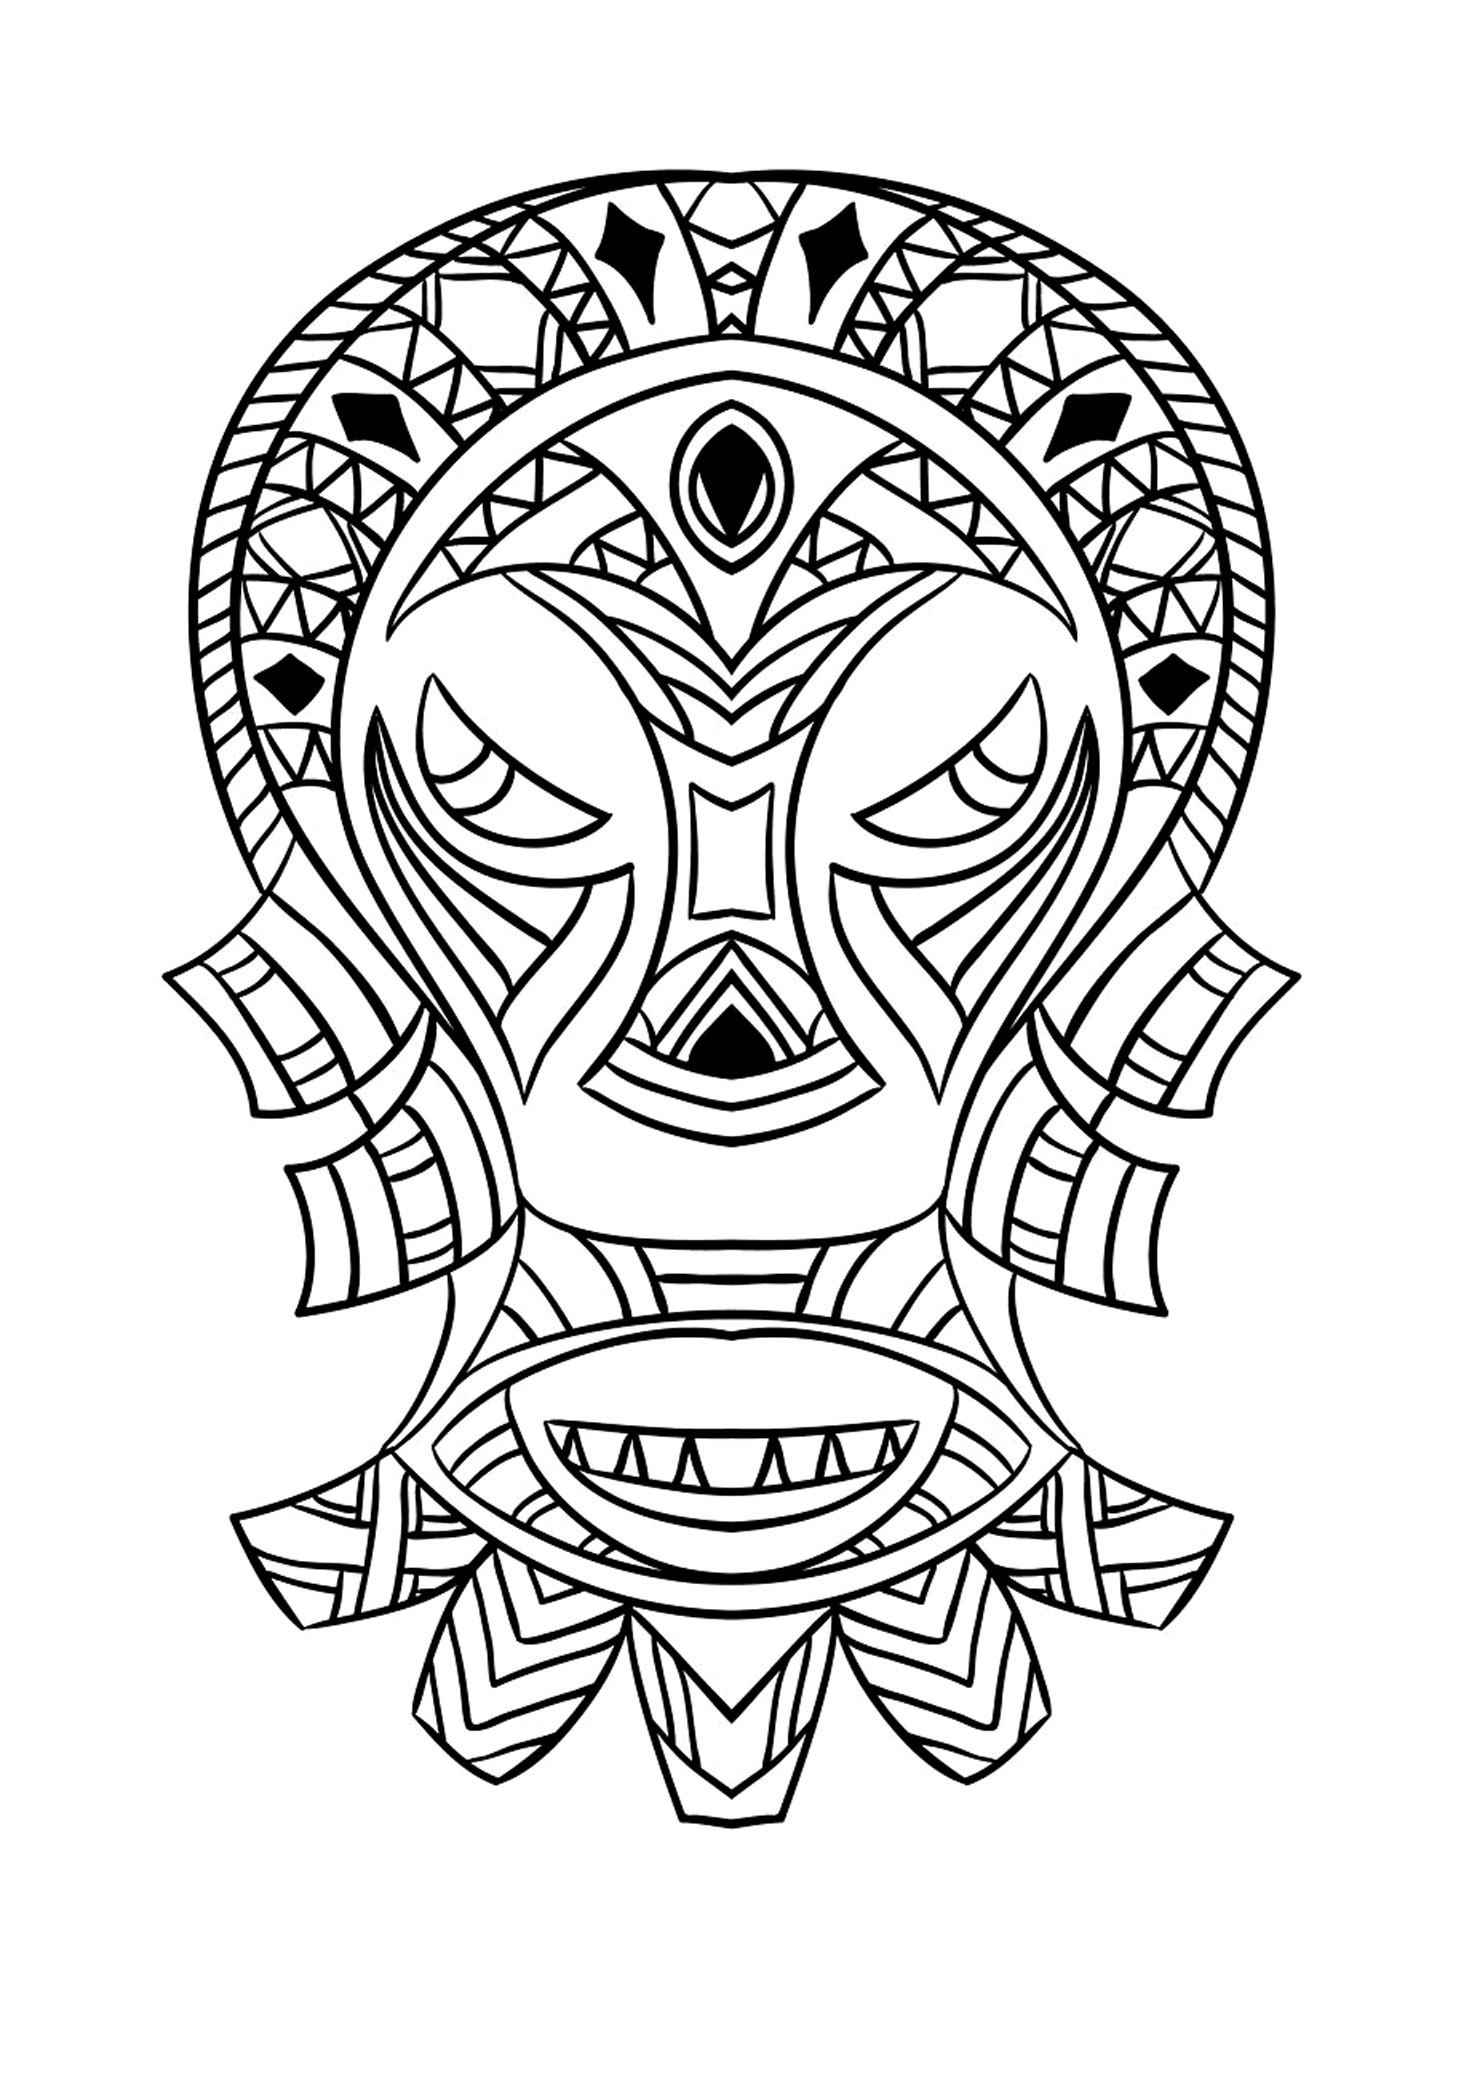 Coloring adult african mask 4